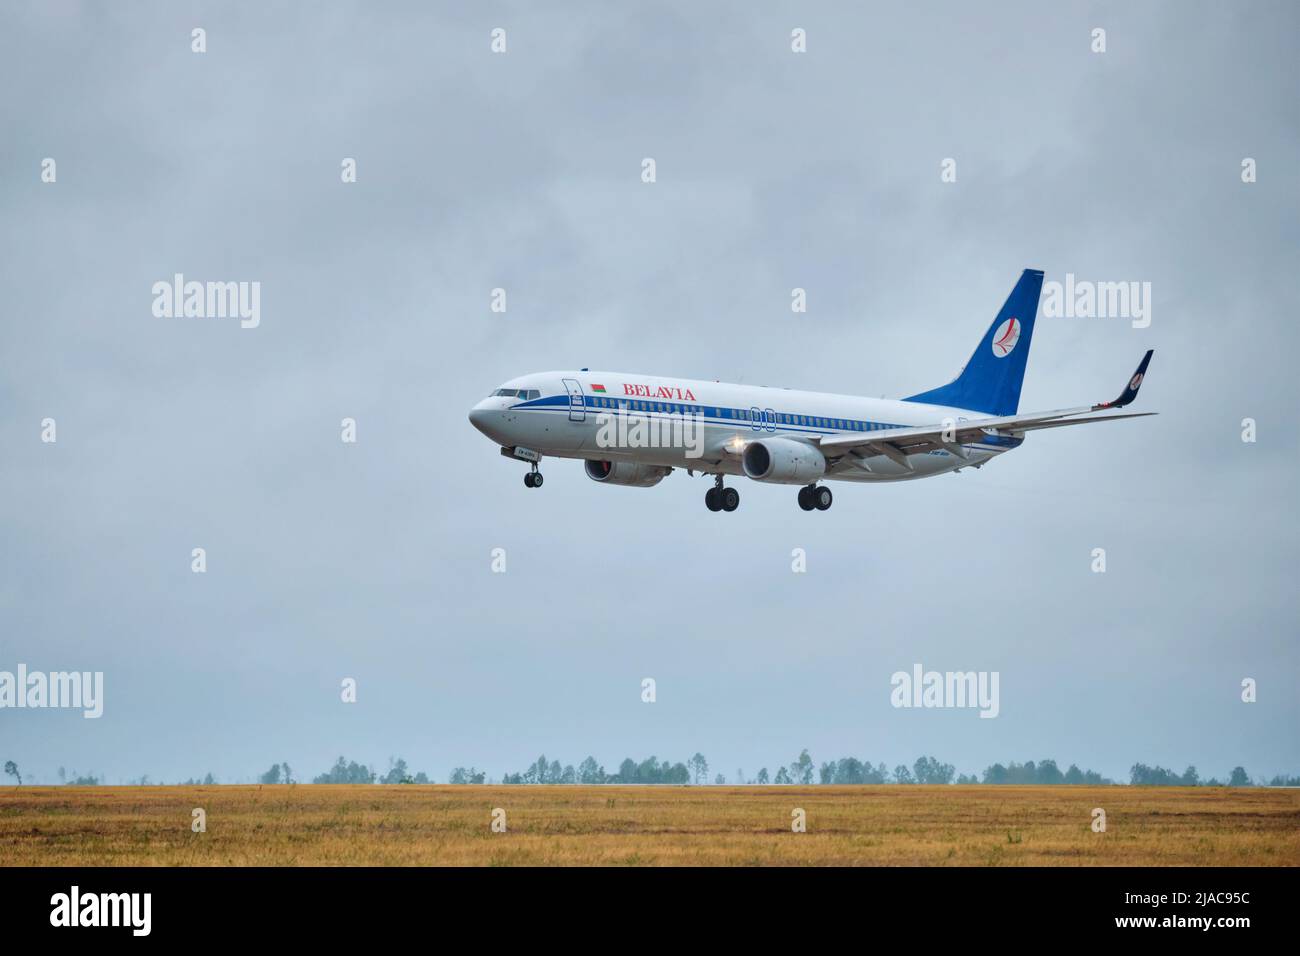 Air plane in National Airport Minsk, Belarus Stock Photo